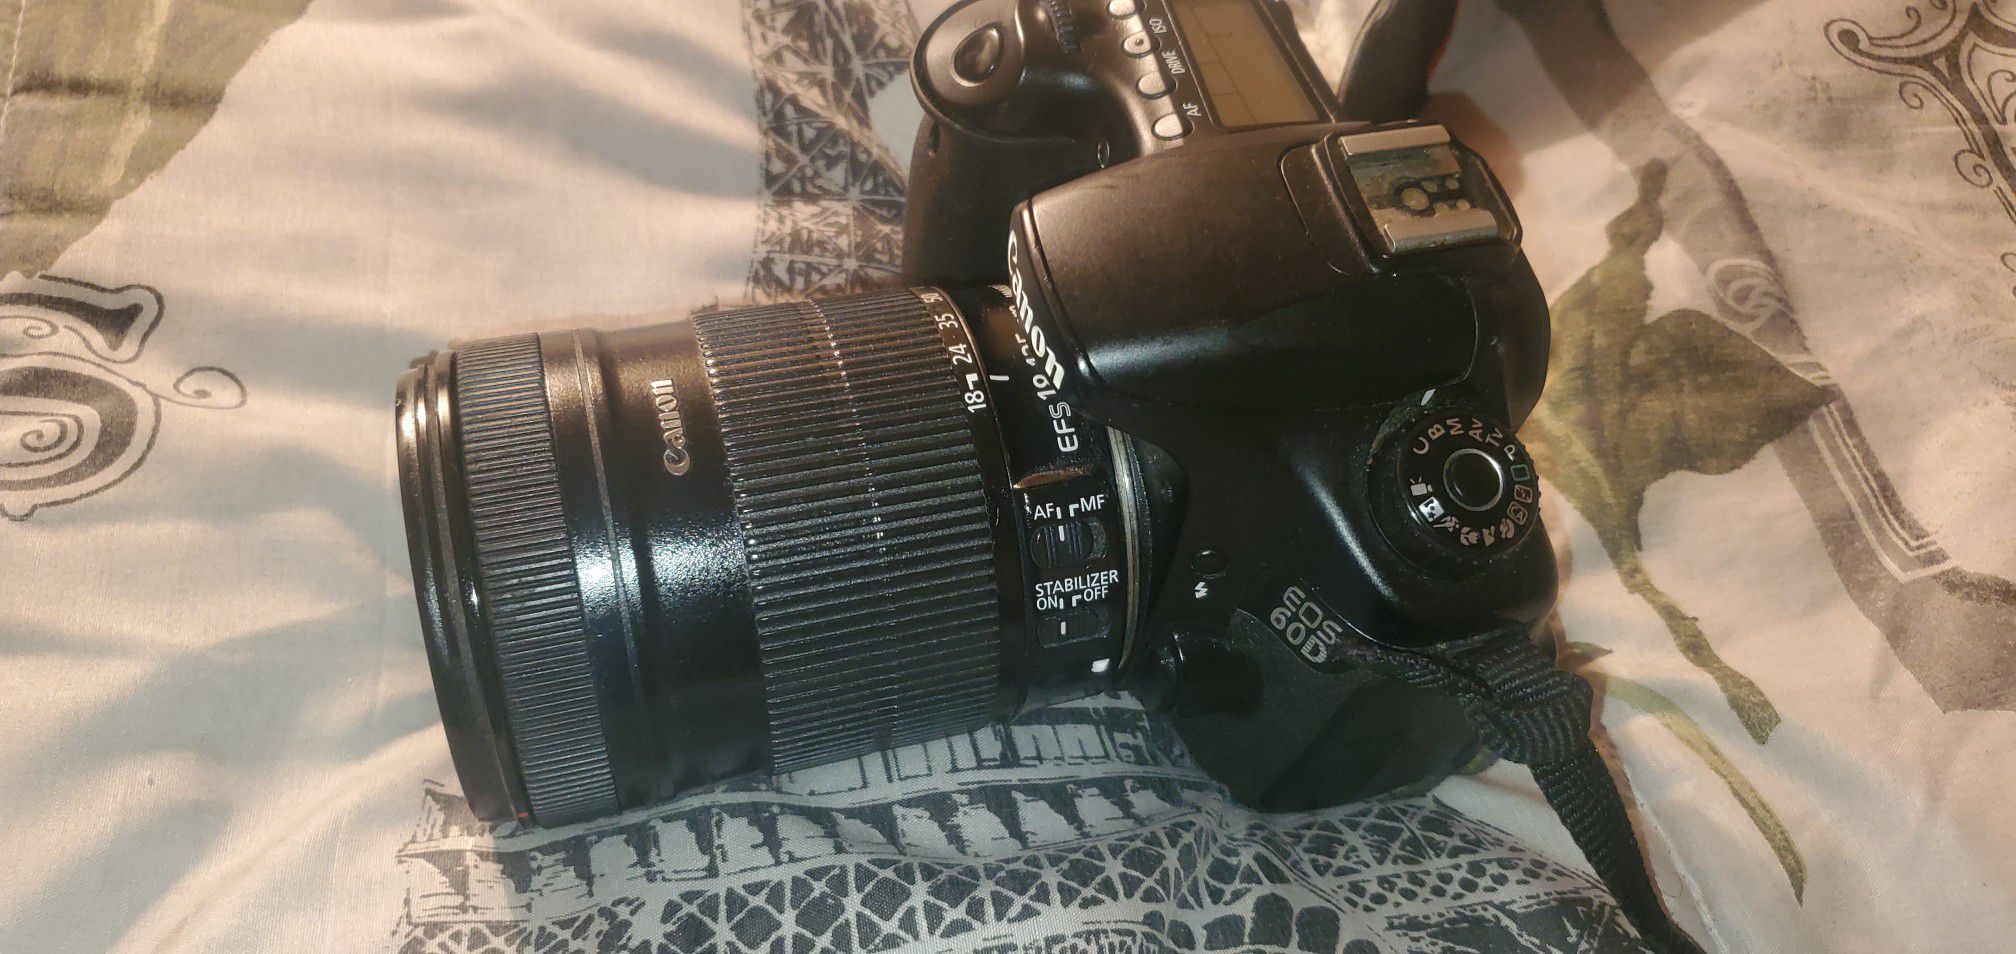 Canon 60d . Also selling Canon lenses and accessories.